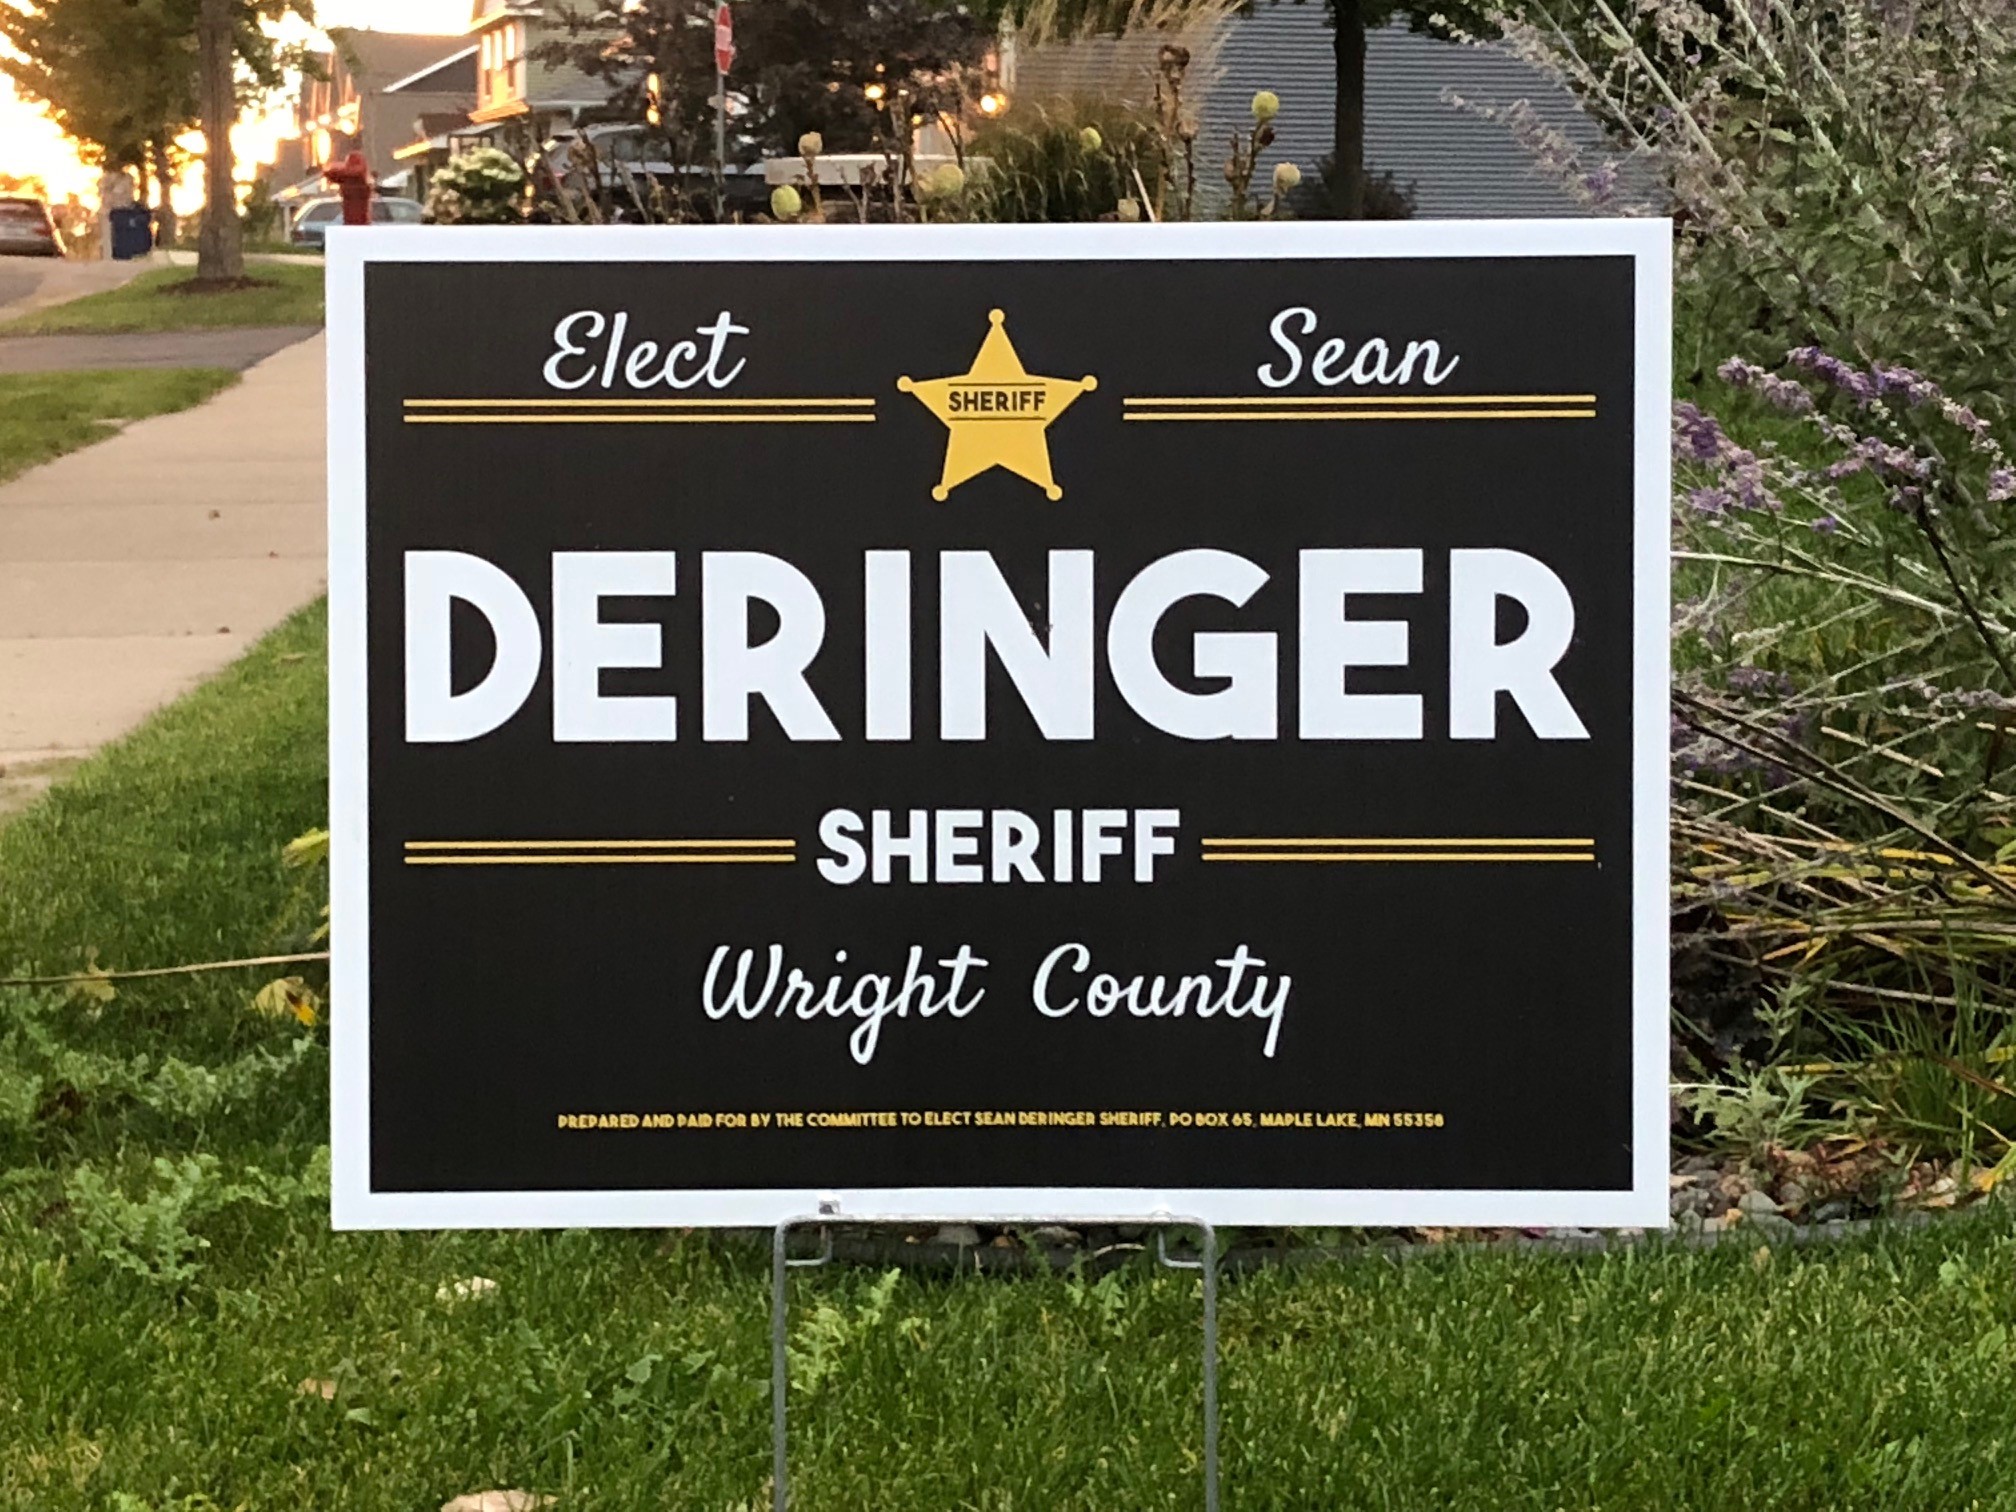 The Clear Choice for Wright County Sheriff